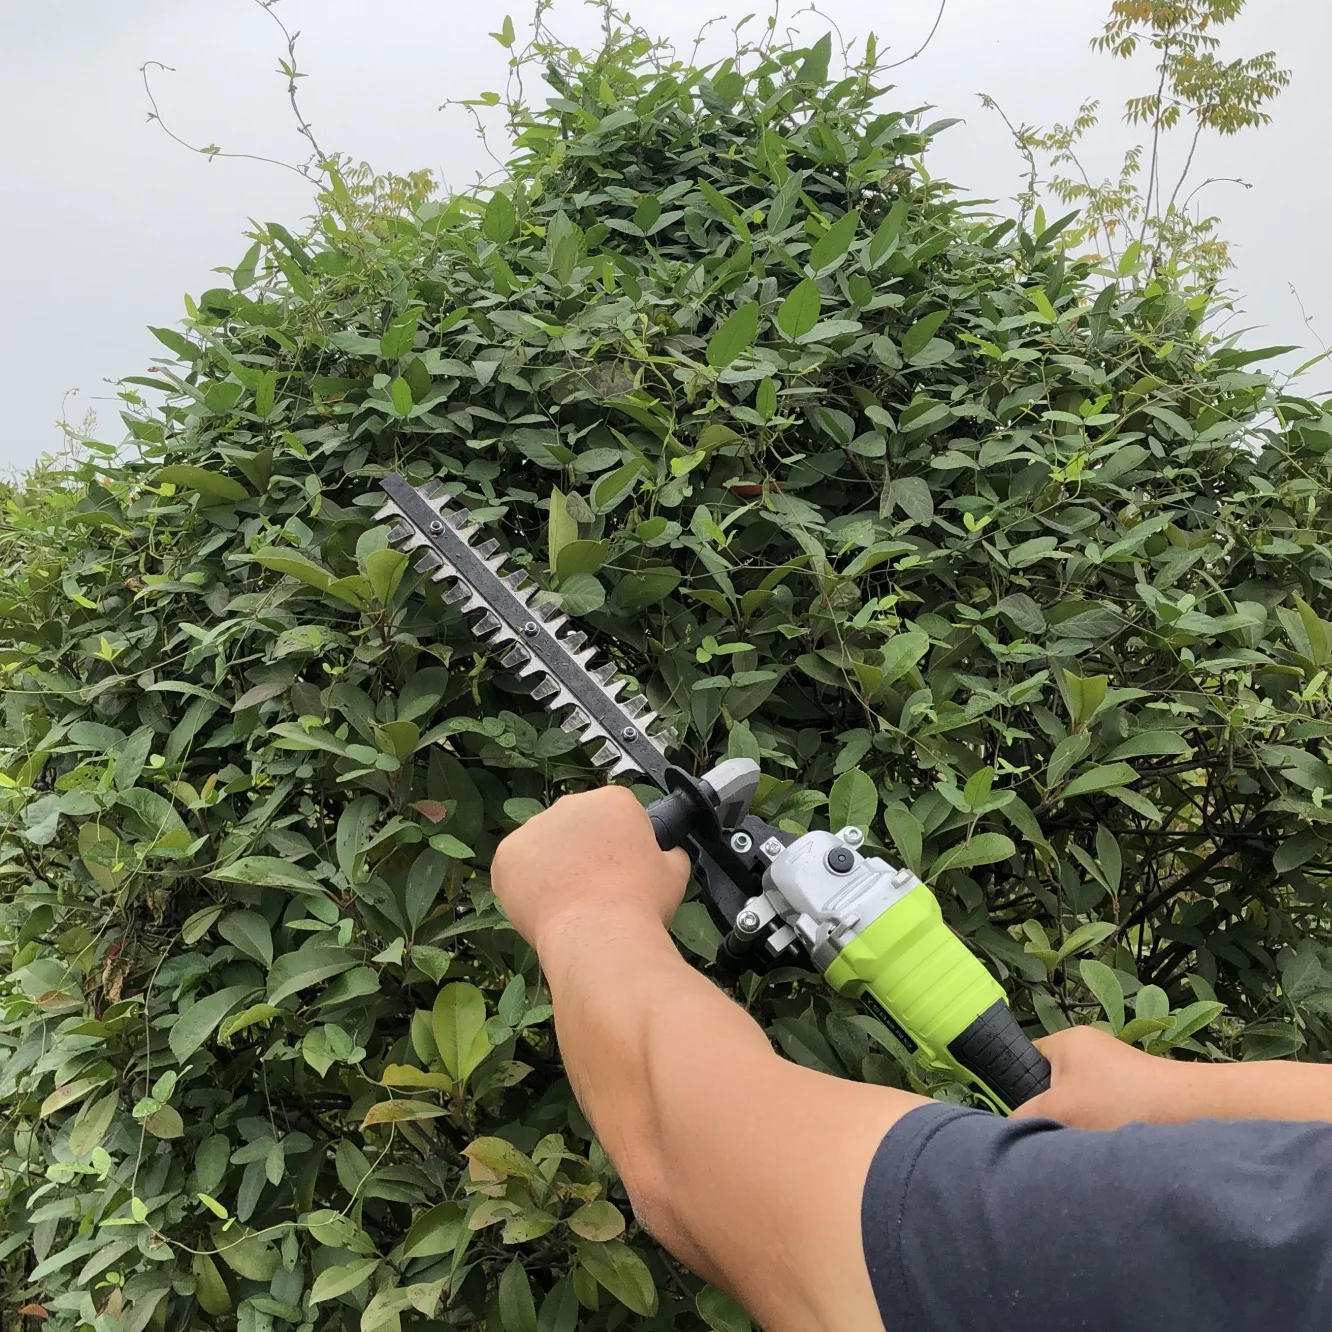 Angle Grinder Refit Garden Pruning Machine Tool Hedge Trimmer Pruning Tools Garden Home Compatible with 110 115 Type Angle Grind